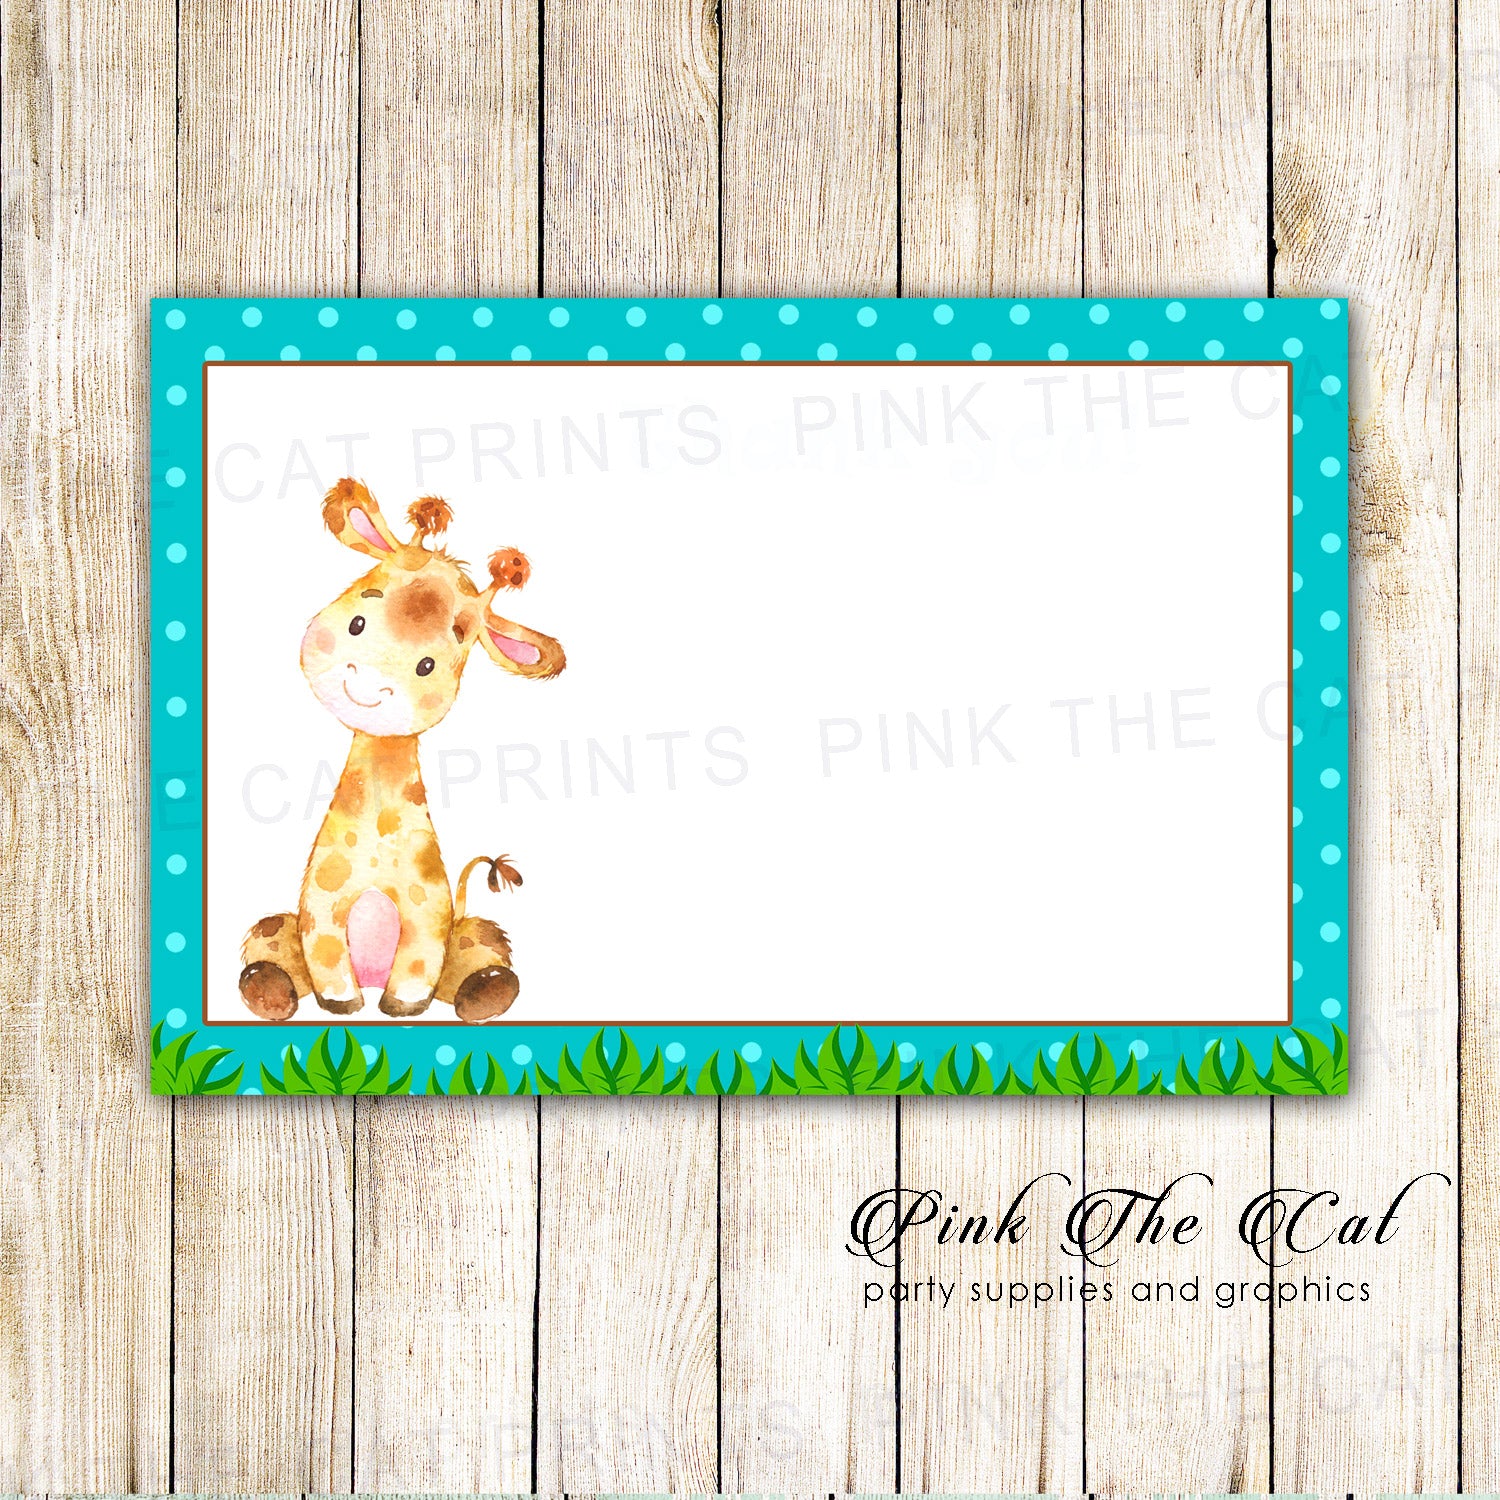 30 thank you cards blank invitations watercolor giraffe teal & envelopes